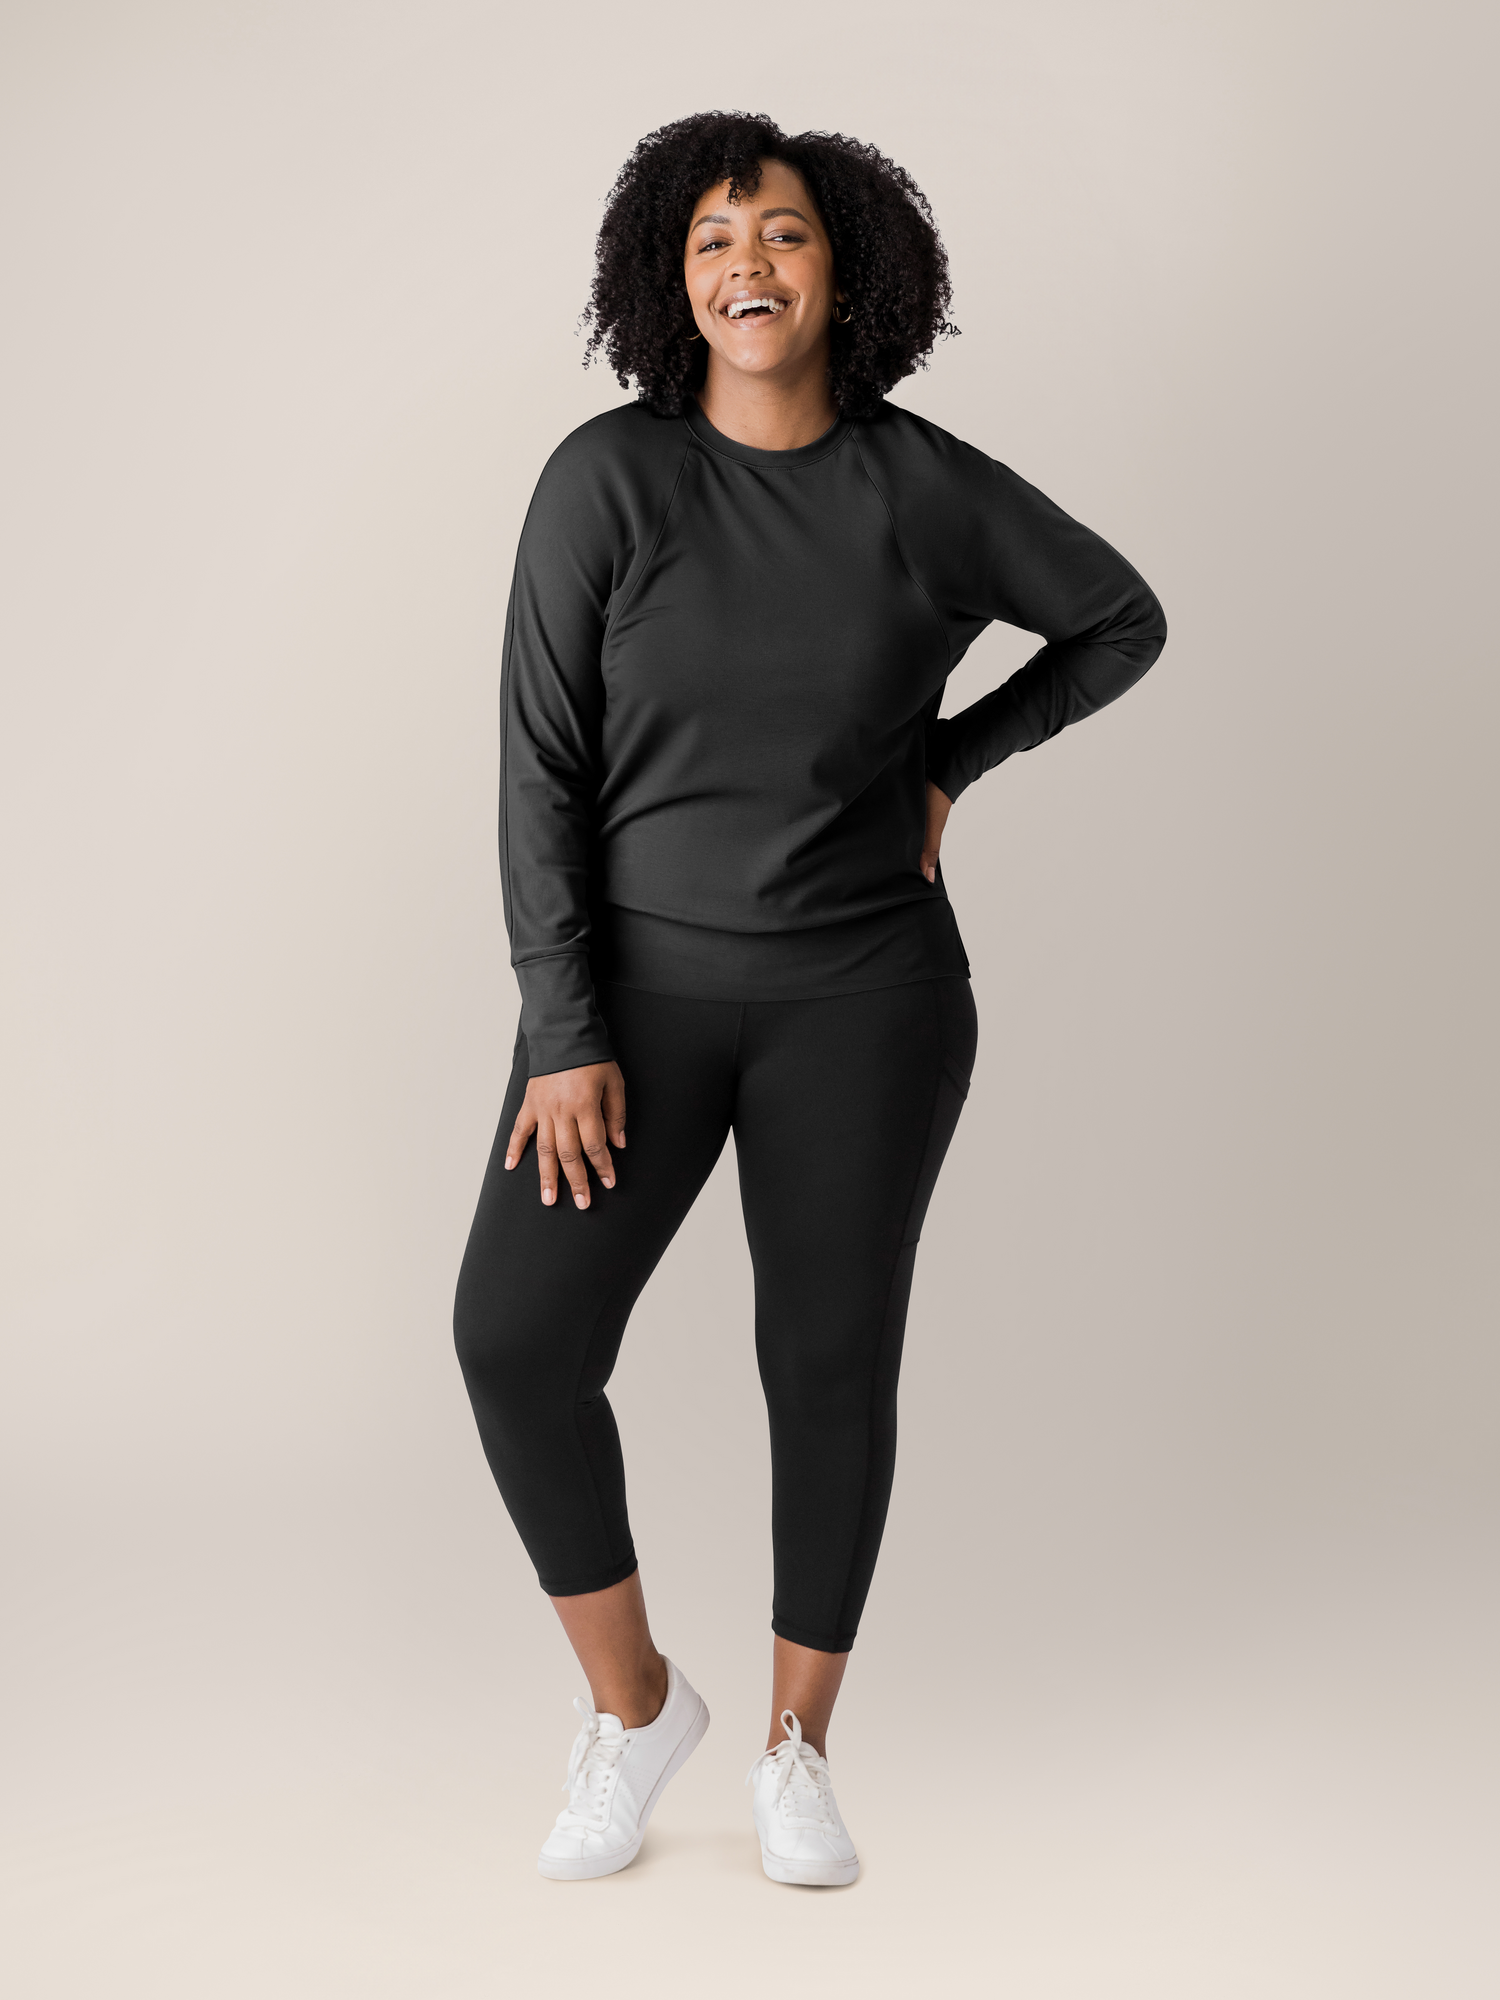 Model wearing the Bamboo Maternity & Nursing Crew Neck Sweatshirt in Black with her hand on her lag @model_info:Roxanne is wearing a Large.